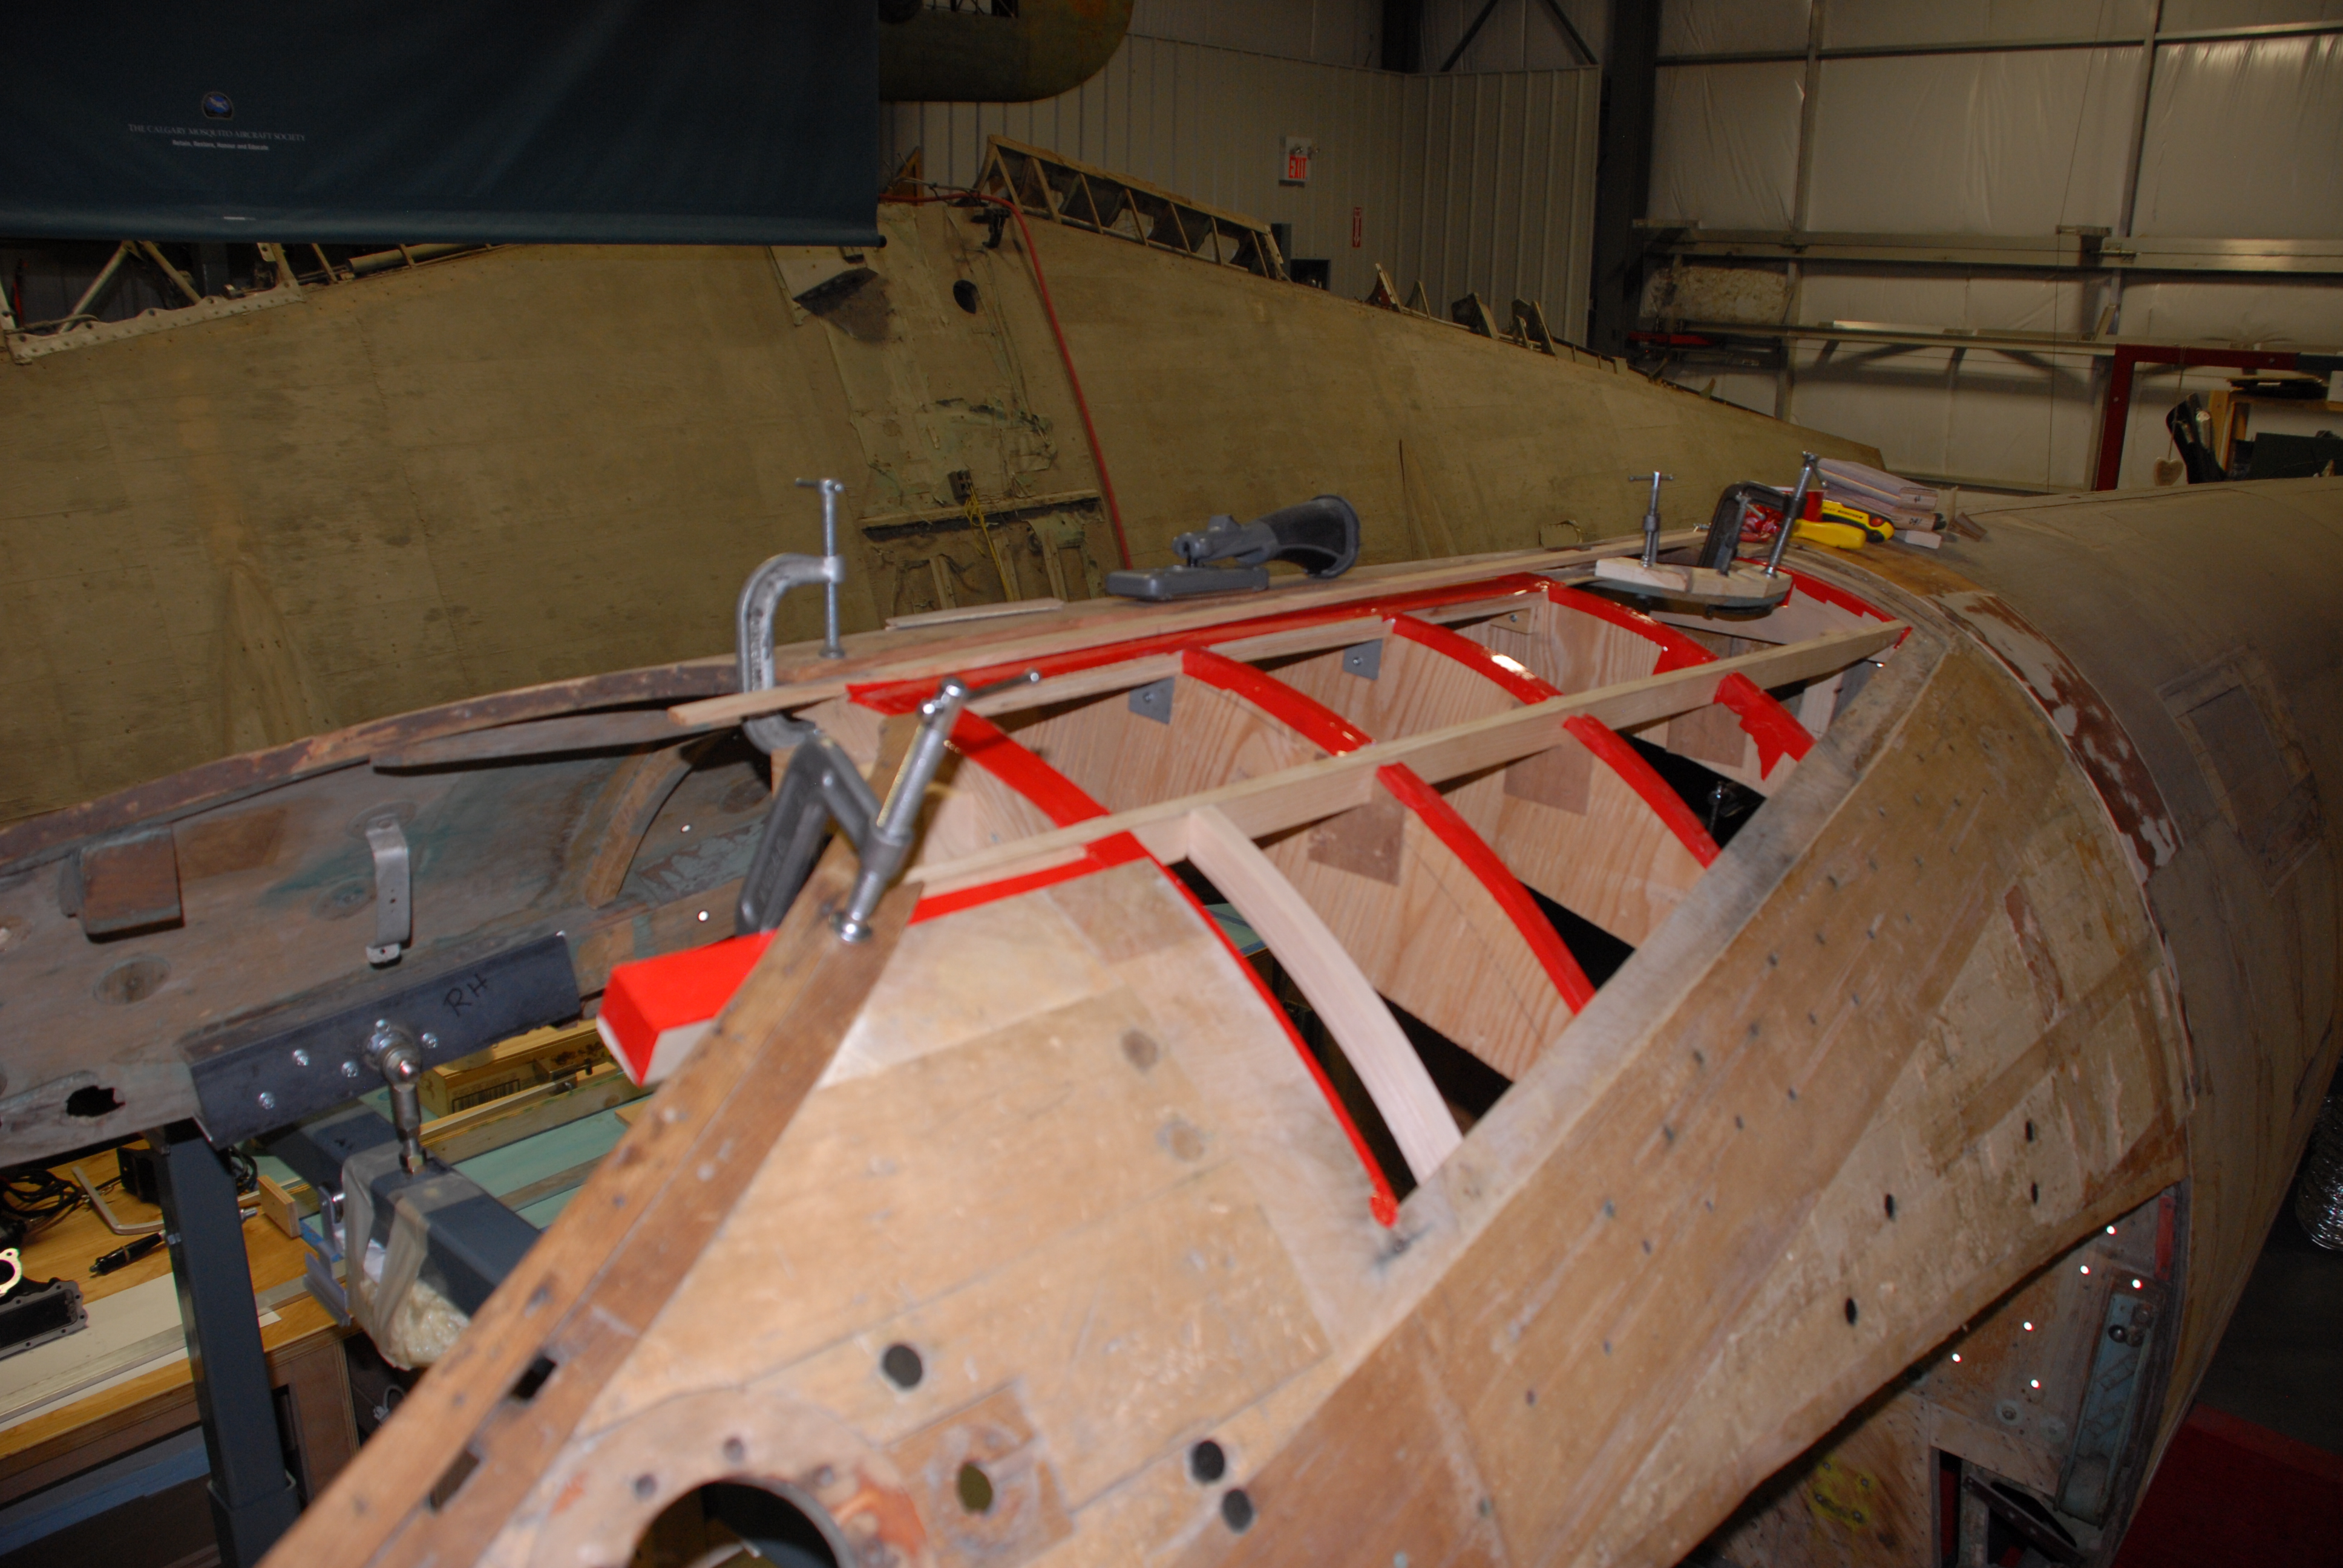 Upper fuselage, just aft of the canopy.